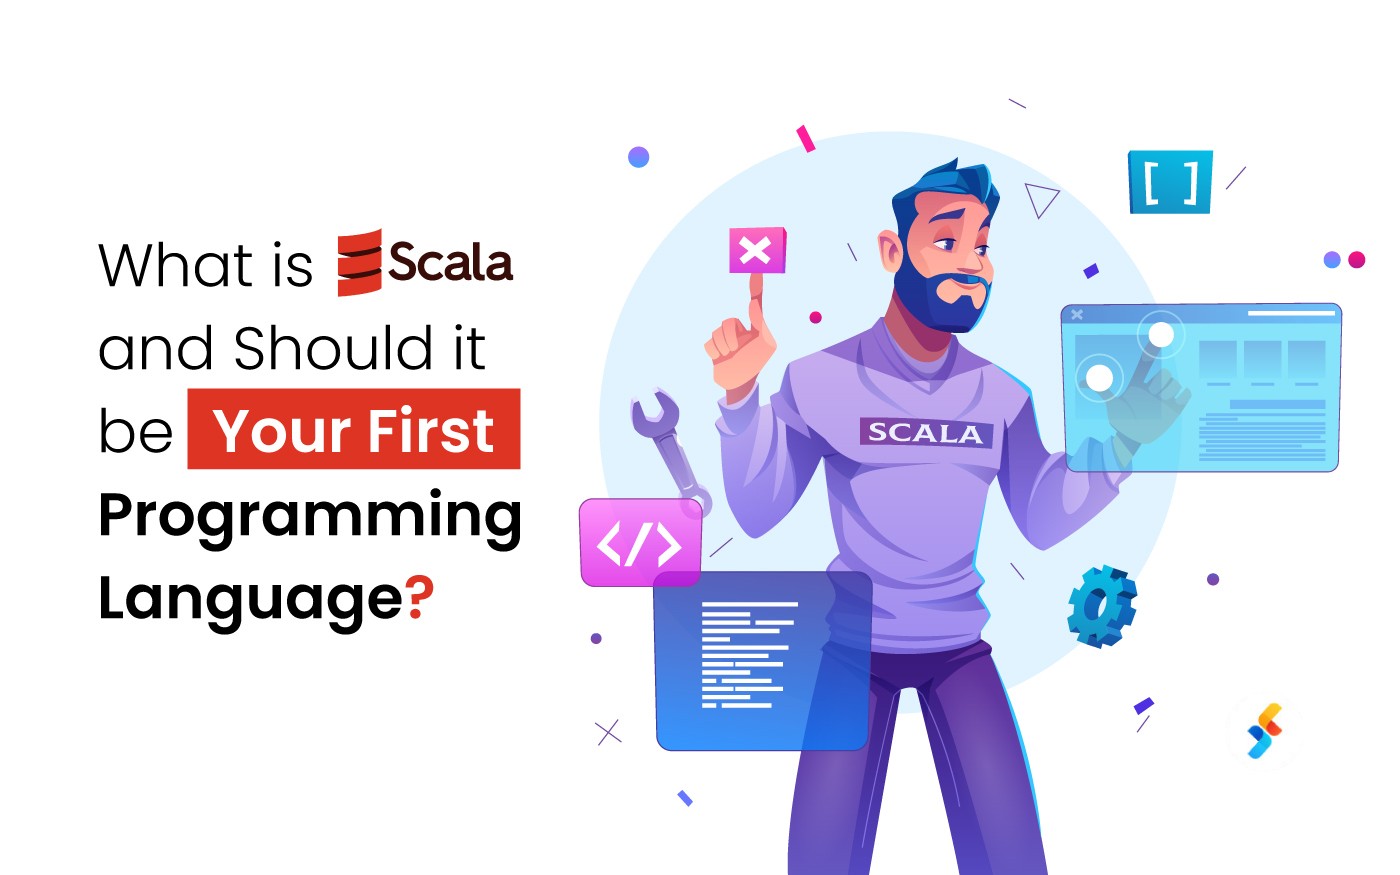 What is Scala and Should it be Your First Programming Language?